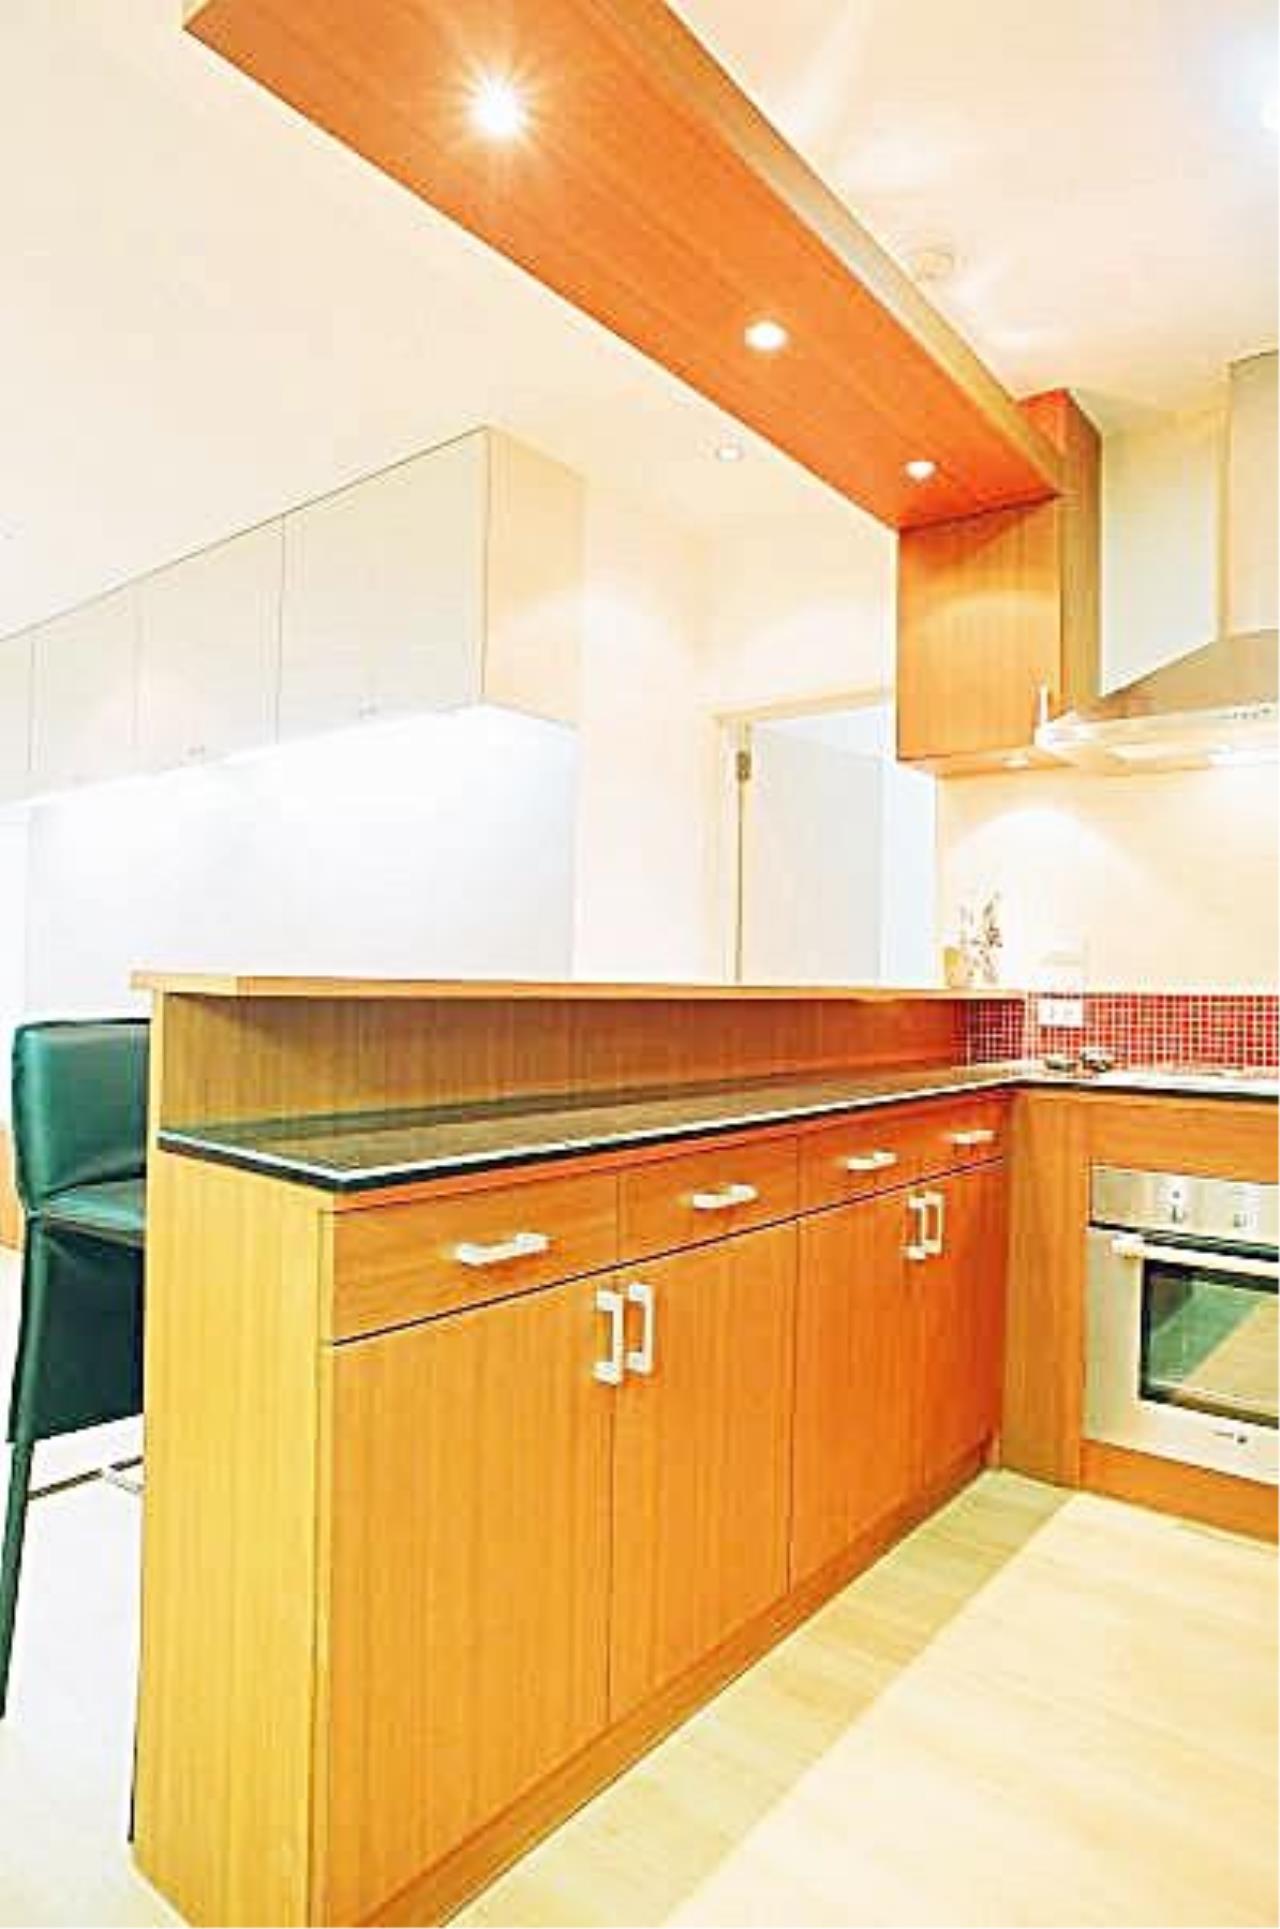 Piri Property Agency's 2 bedrooms  For Rent Silom Grand Terrace 7